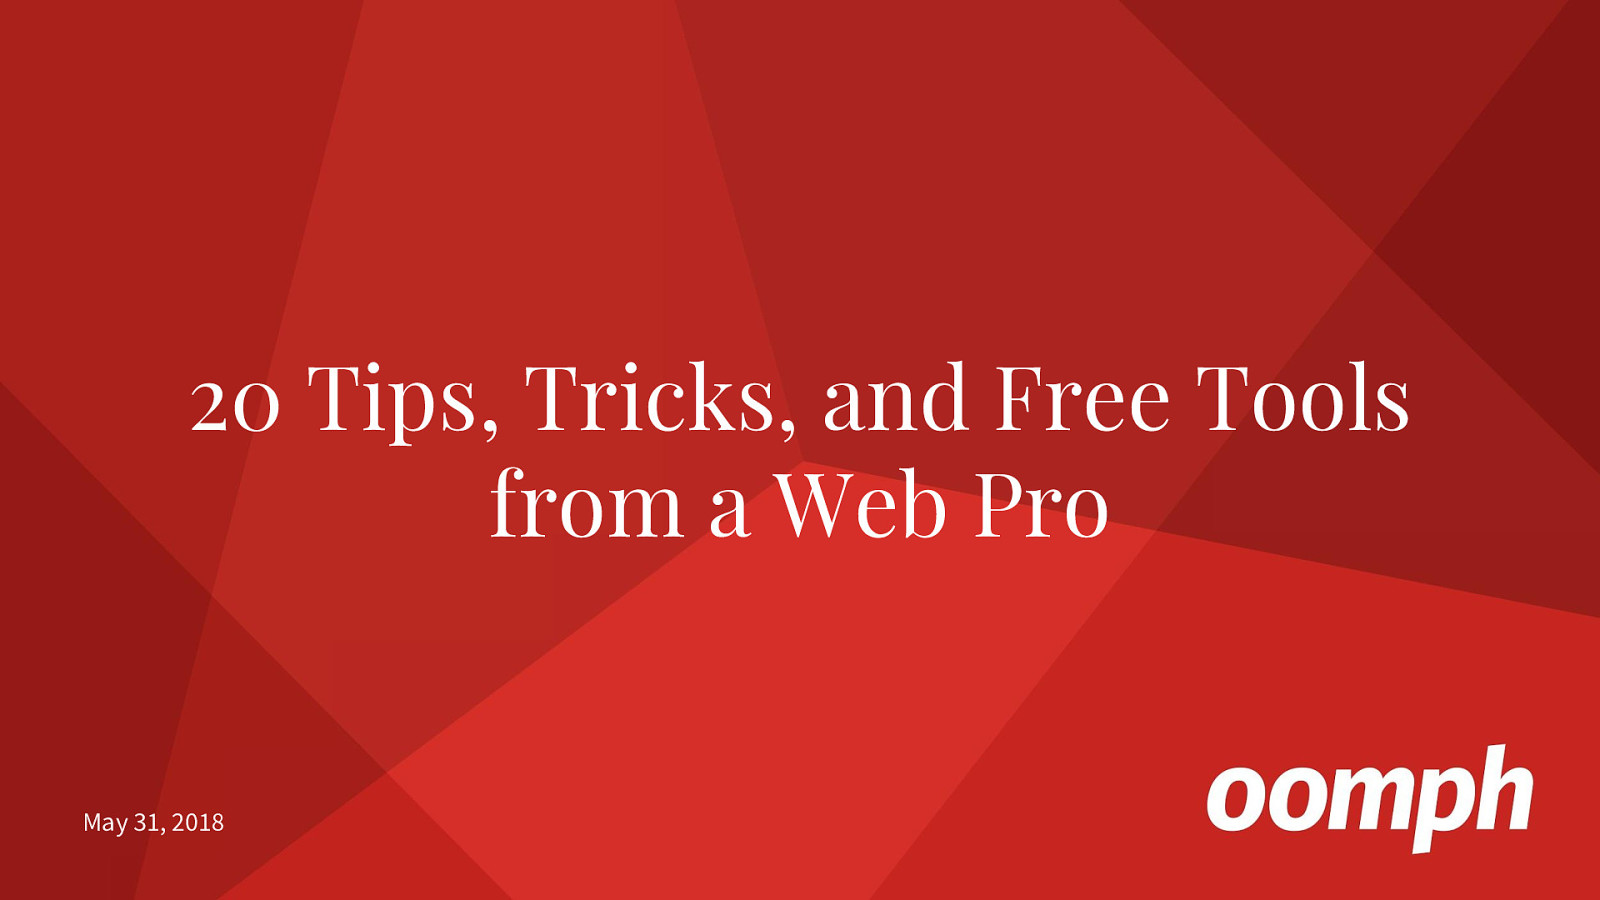 20 Tips, Tricks, and Free Tools from a Web Pro